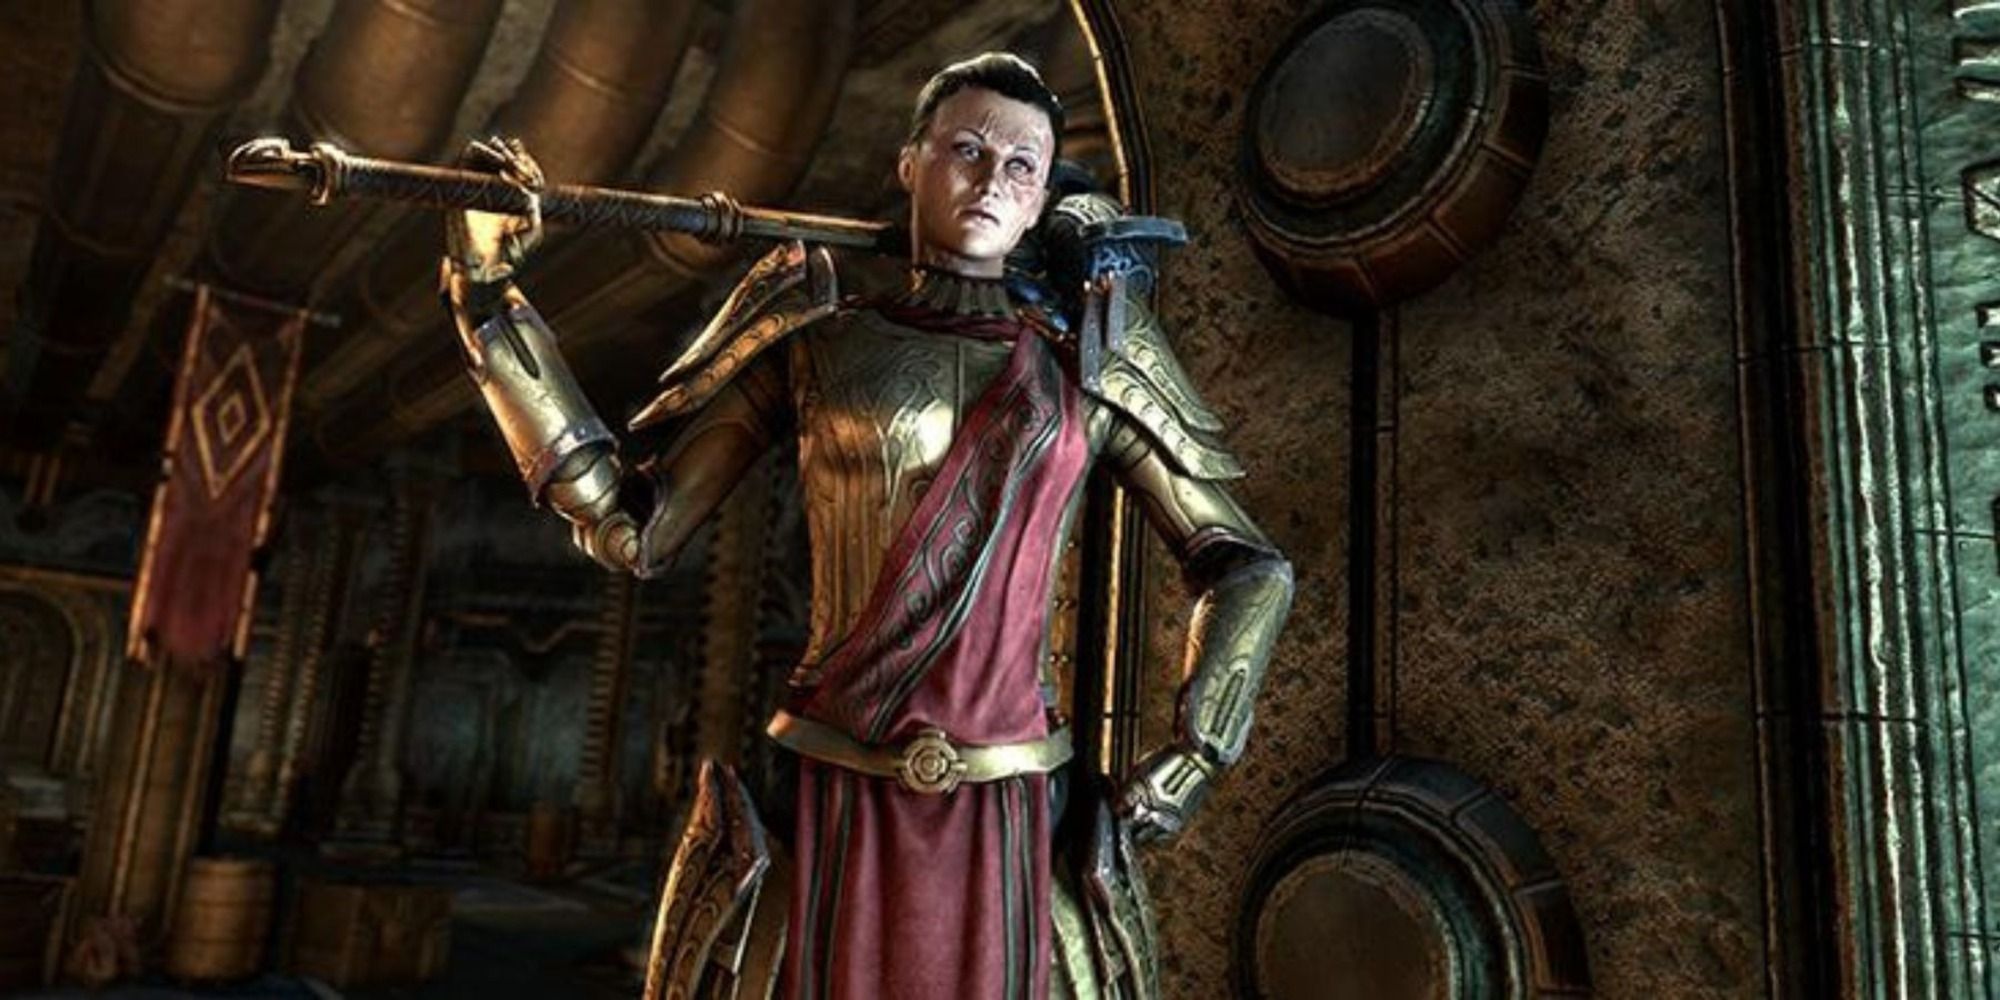 Skyrim_ The 20 Strongest Mages, According To Lore Luciana Pullo (2)